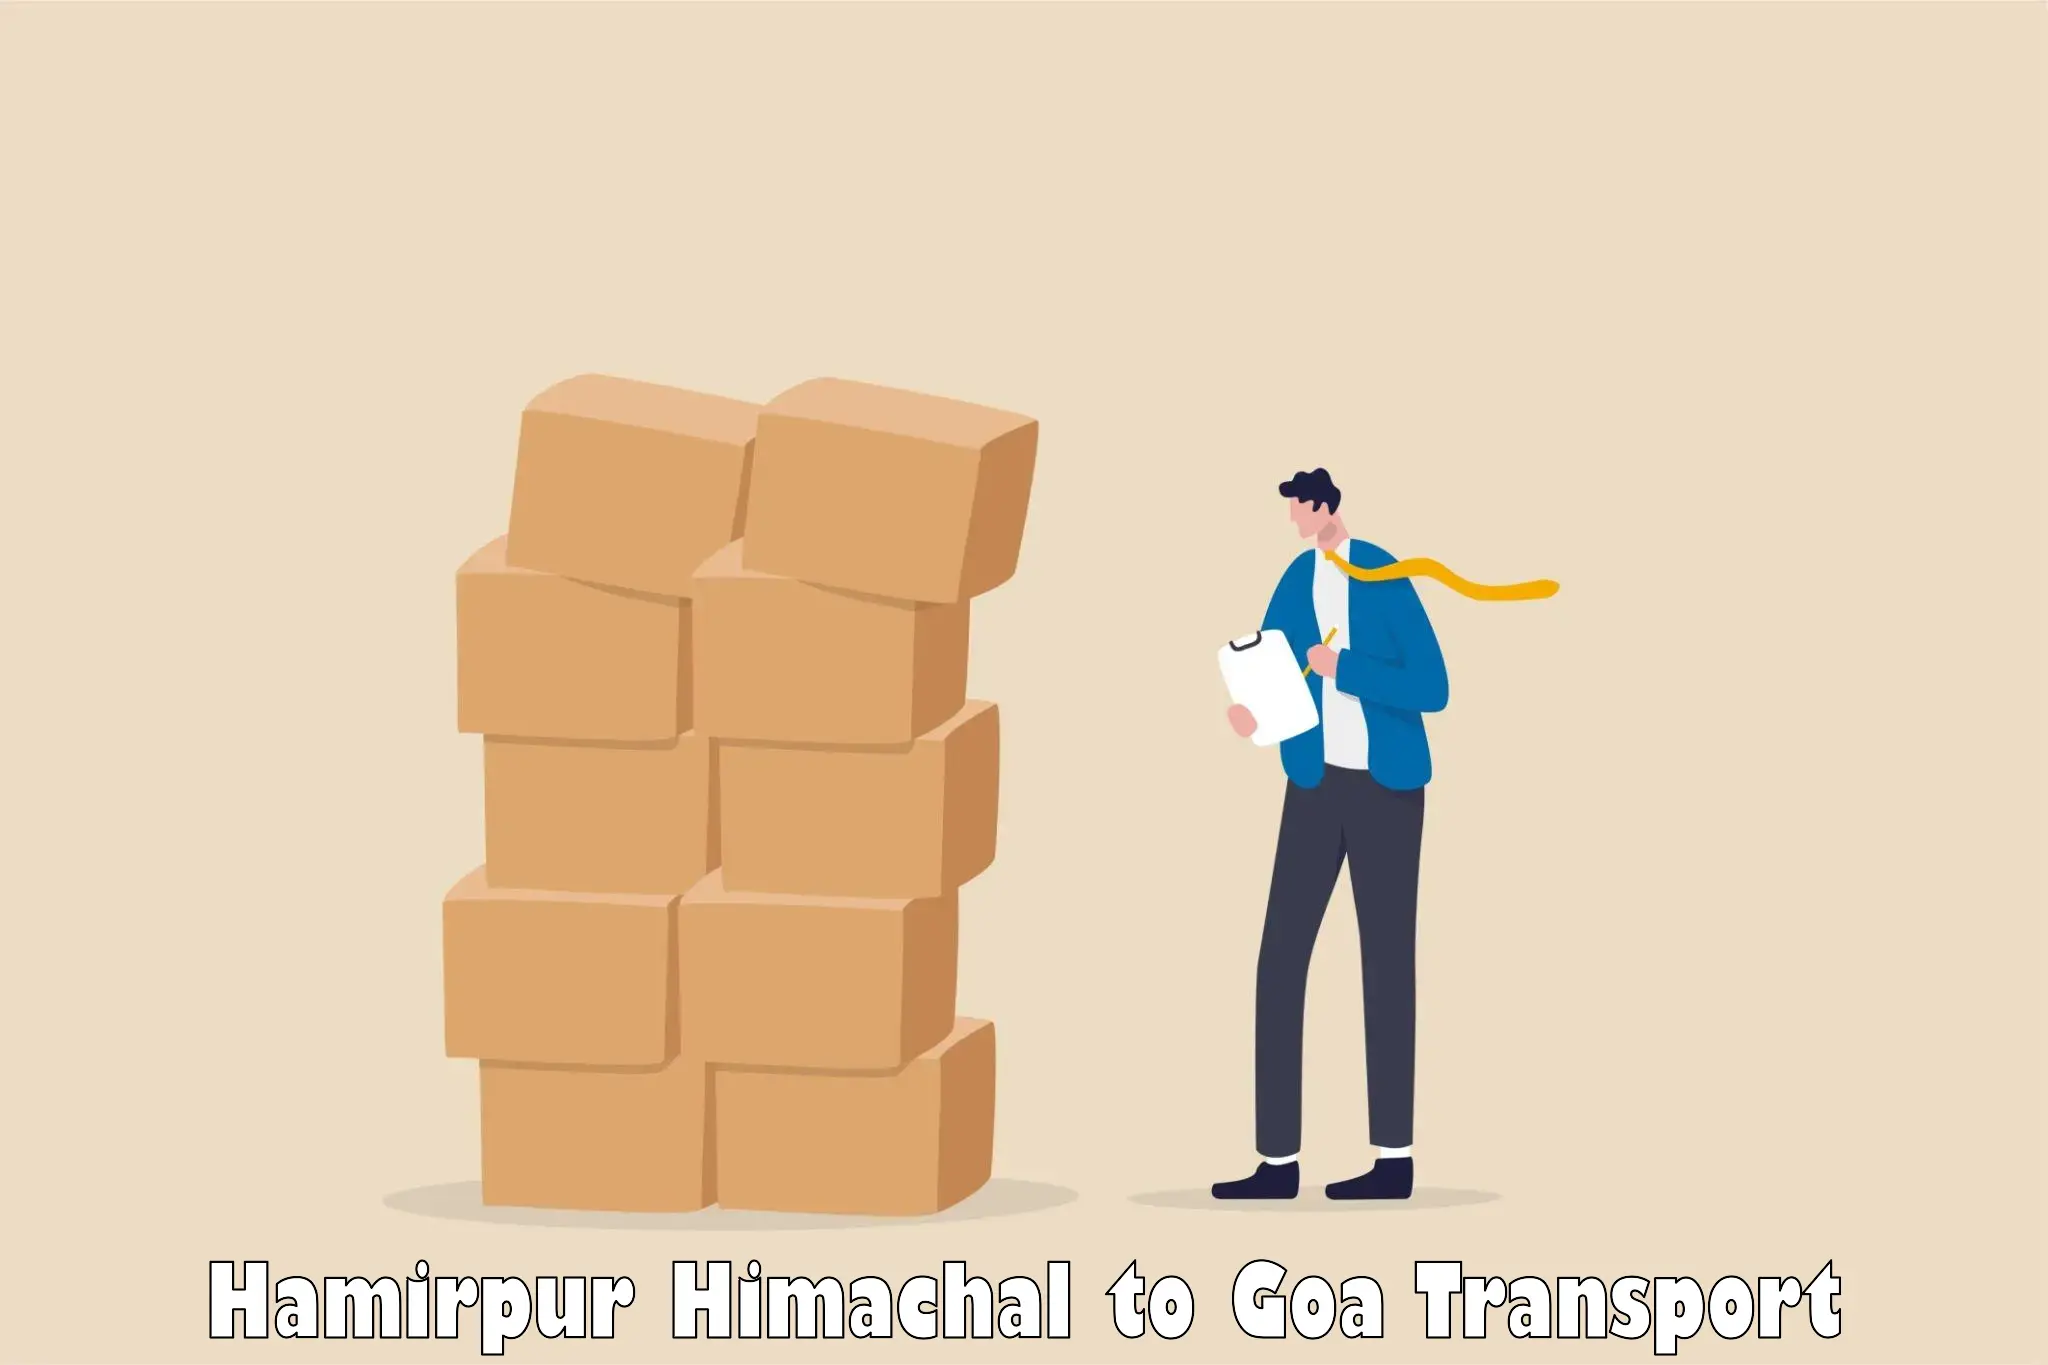 Nearby transport service in Hamirpur Himachal to Goa